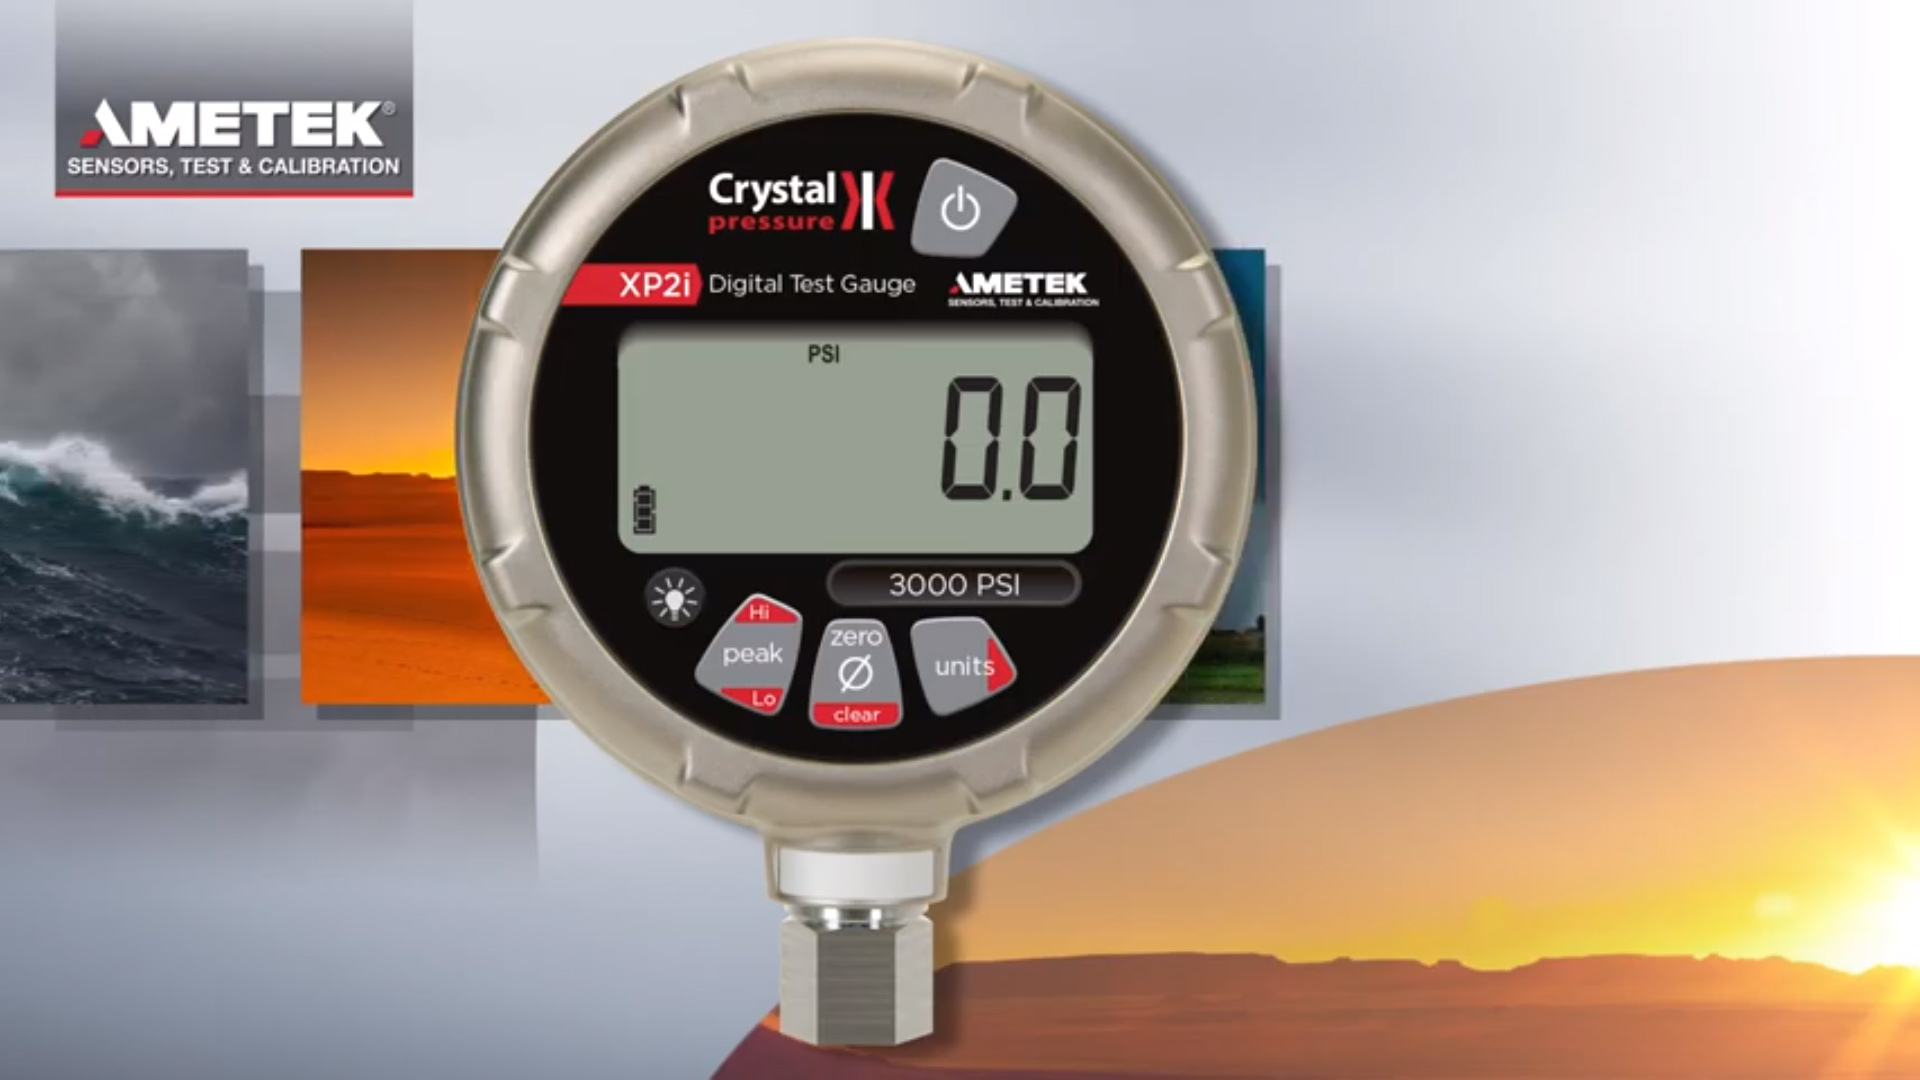 Ametek Crystal XP2i Digital Pressure Gauge sensor testing advert, with weather related images in different colour modes as the background.